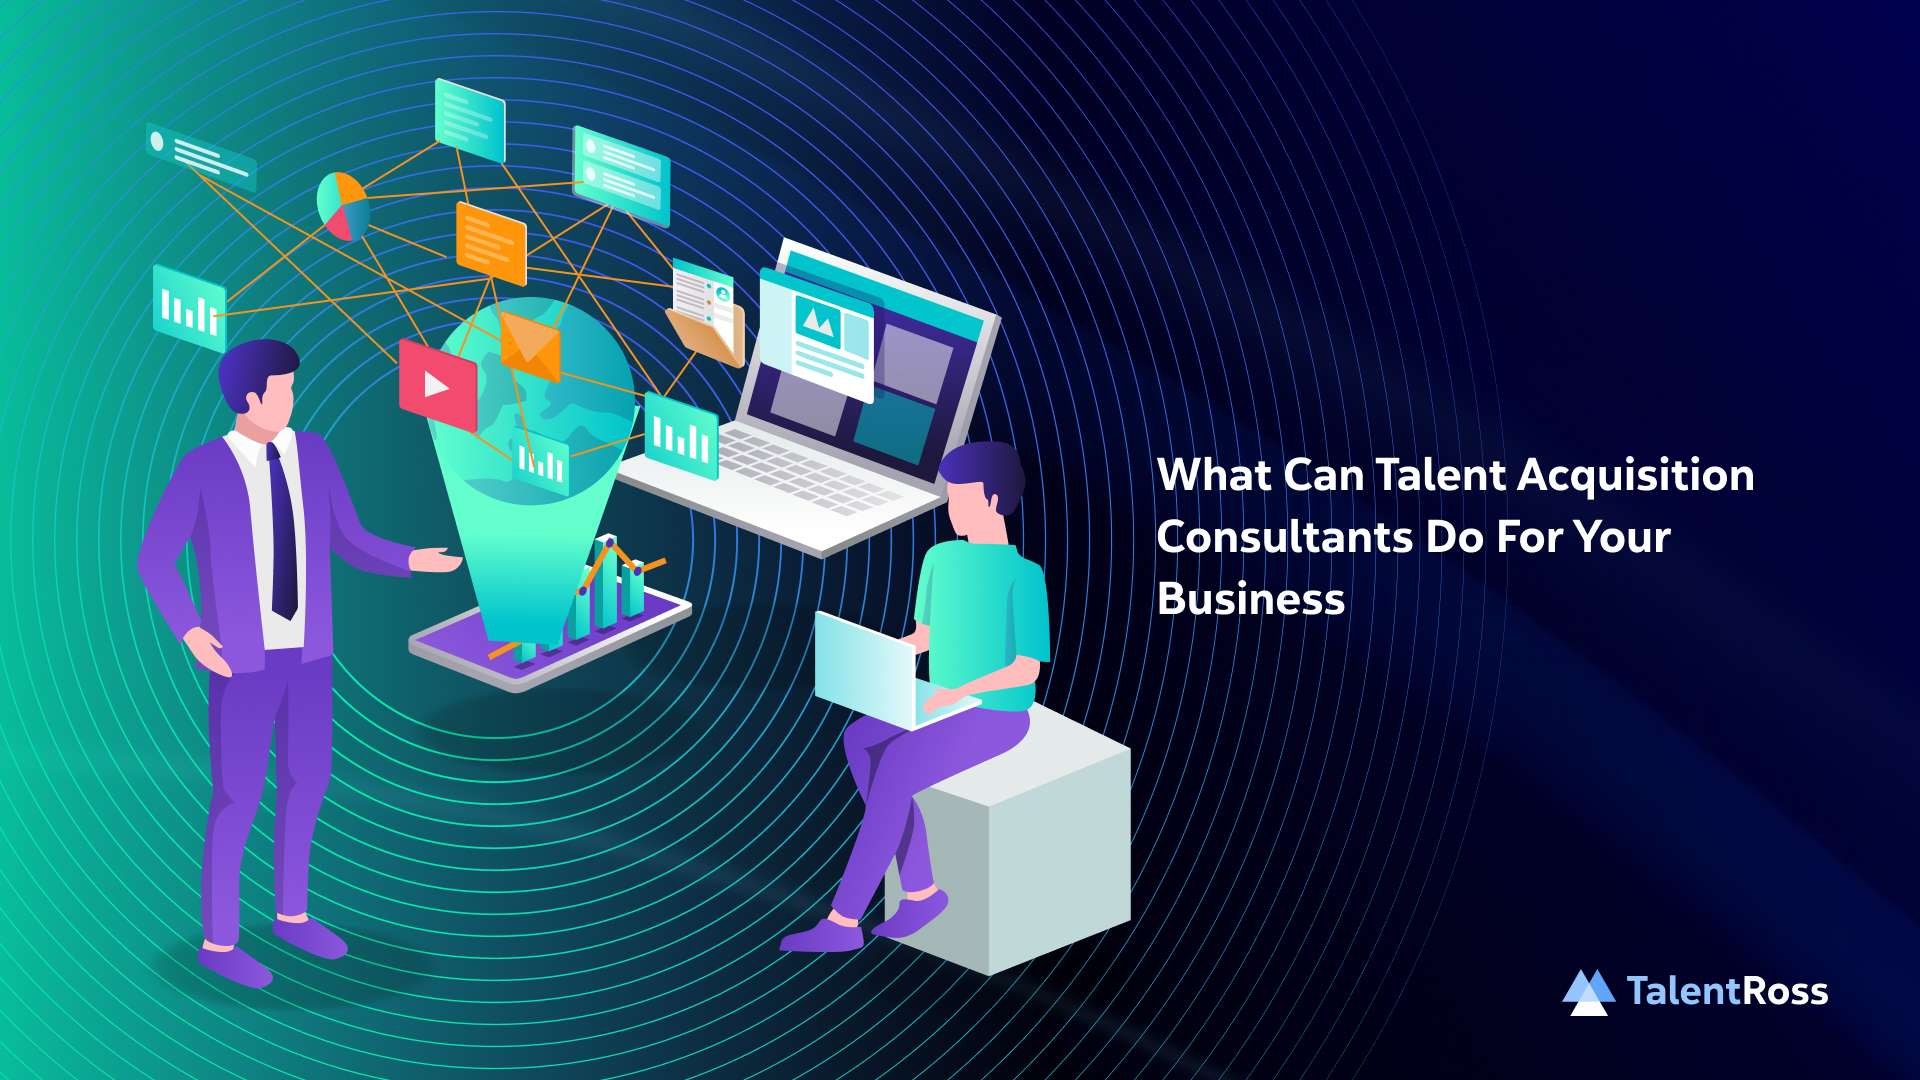 What Can Talent Acquisition Consultants Do For Your Business